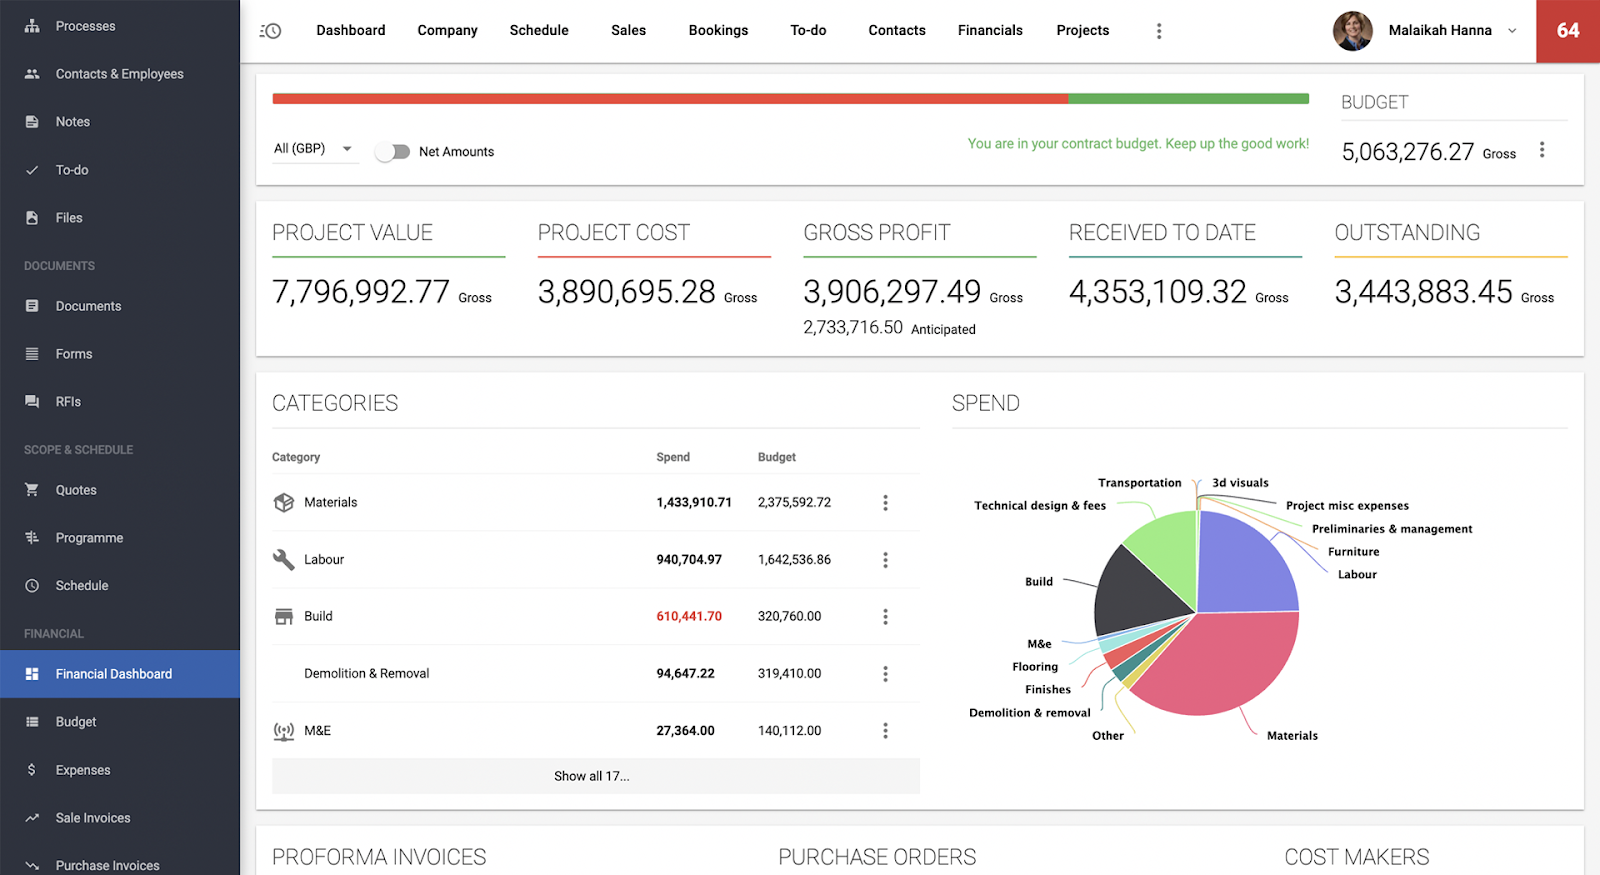 Financial dashboard showing the financial health of a construction project.